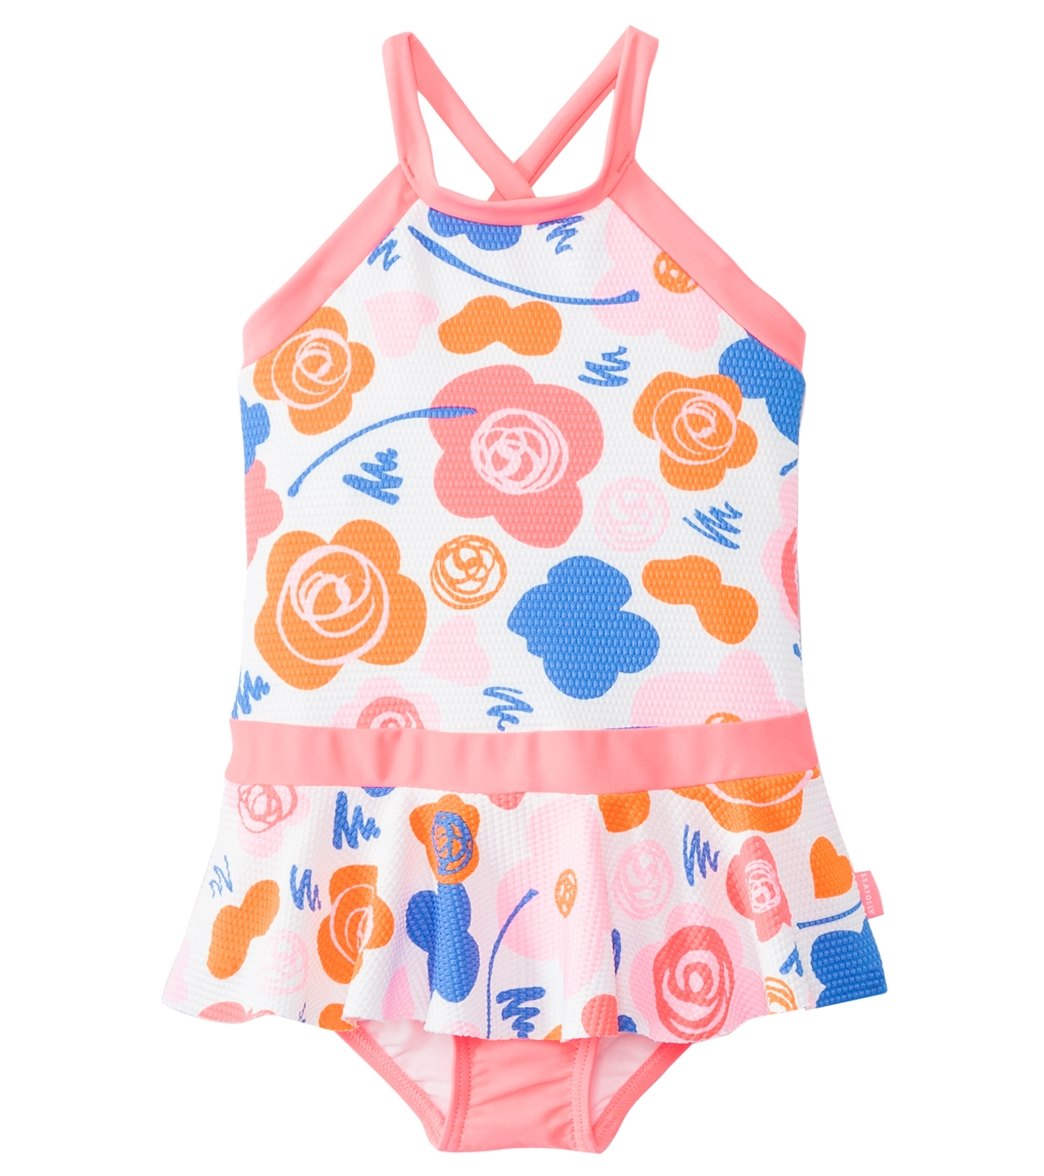 Seafolly Girls' Vintage Pop Skirted Tank One Piece Swimsuit 2Yrs-6Yrs - Multi 2T - Swimoutlet.com